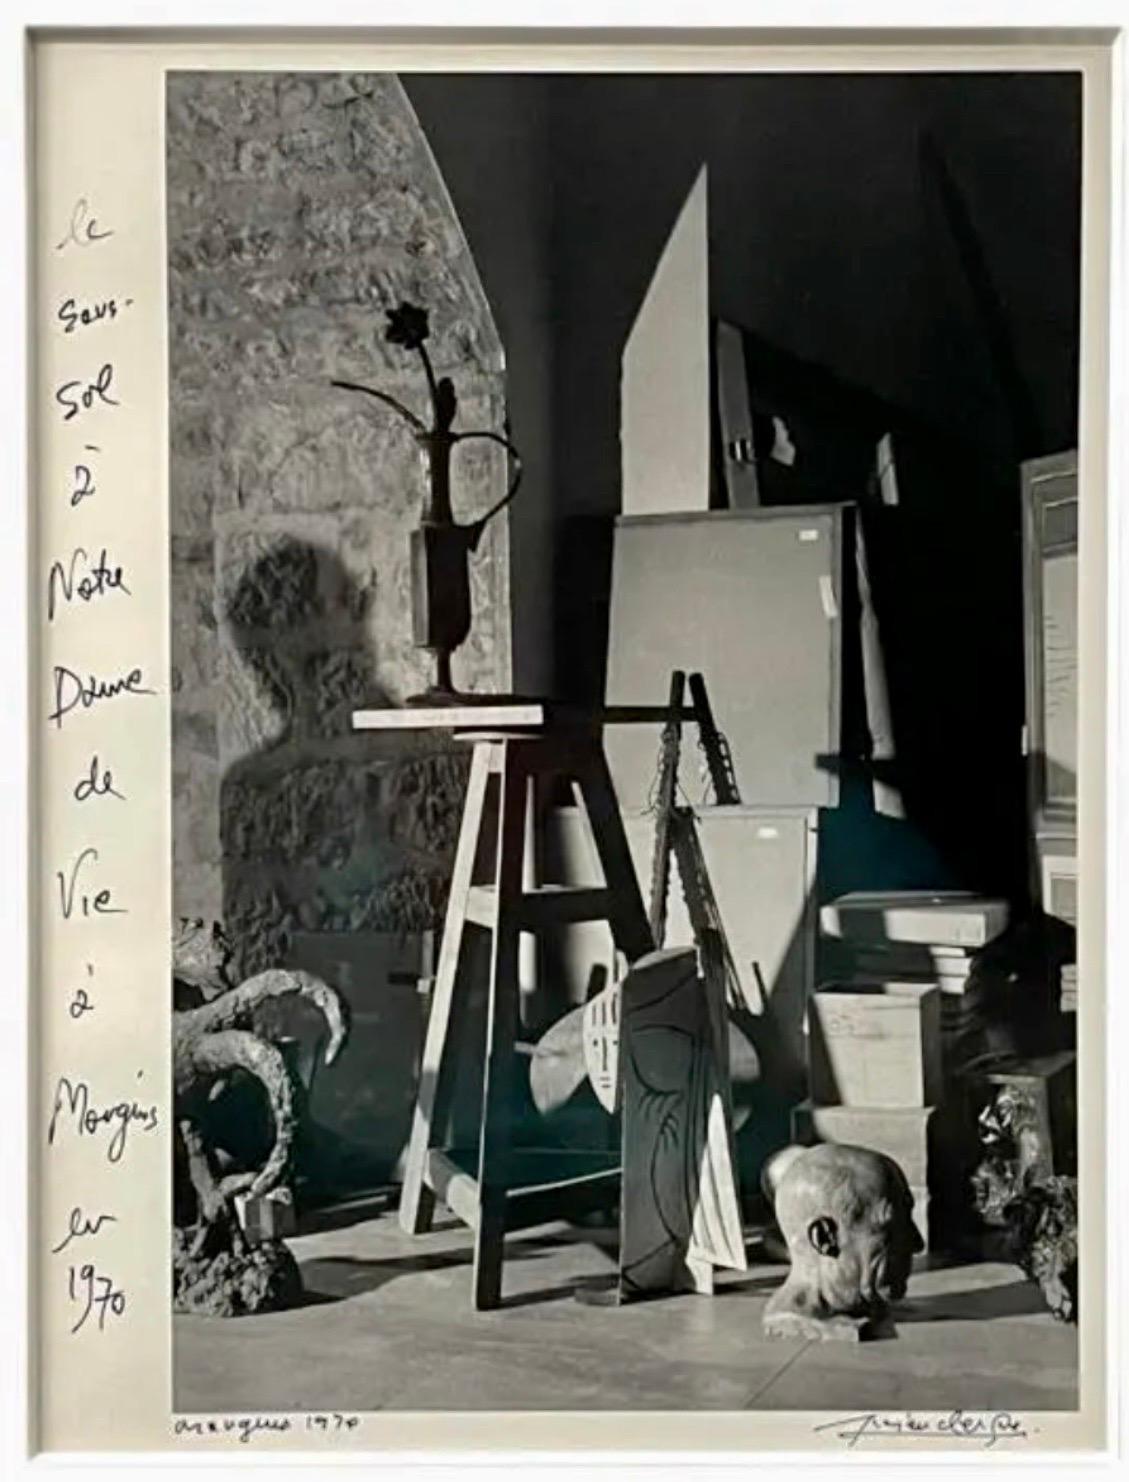 Lucien Clergue (FRENCH, 1934 - 2014) 
Gelatin silver photographic print depicting the workshop sculptures, present-absent, Notre Dame de Vie, 1970
Architectural study of Picasso's atelier studio with sculpture circa 1970. Mougins.
Hand signed by the